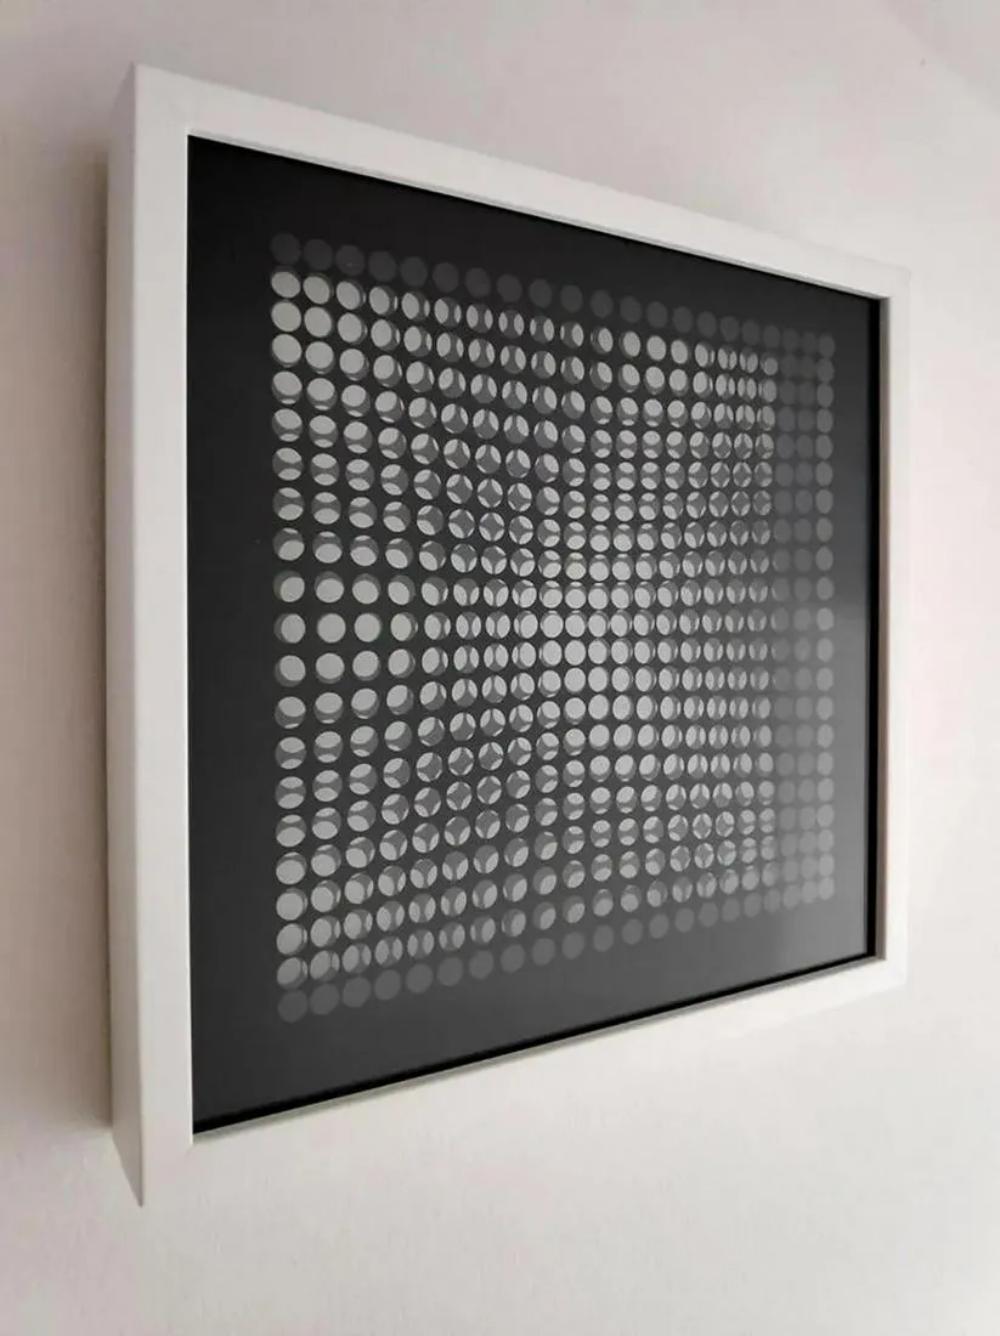 VICTOR VASARELY - OEUVRES PROFONDES CINETIQUES VII